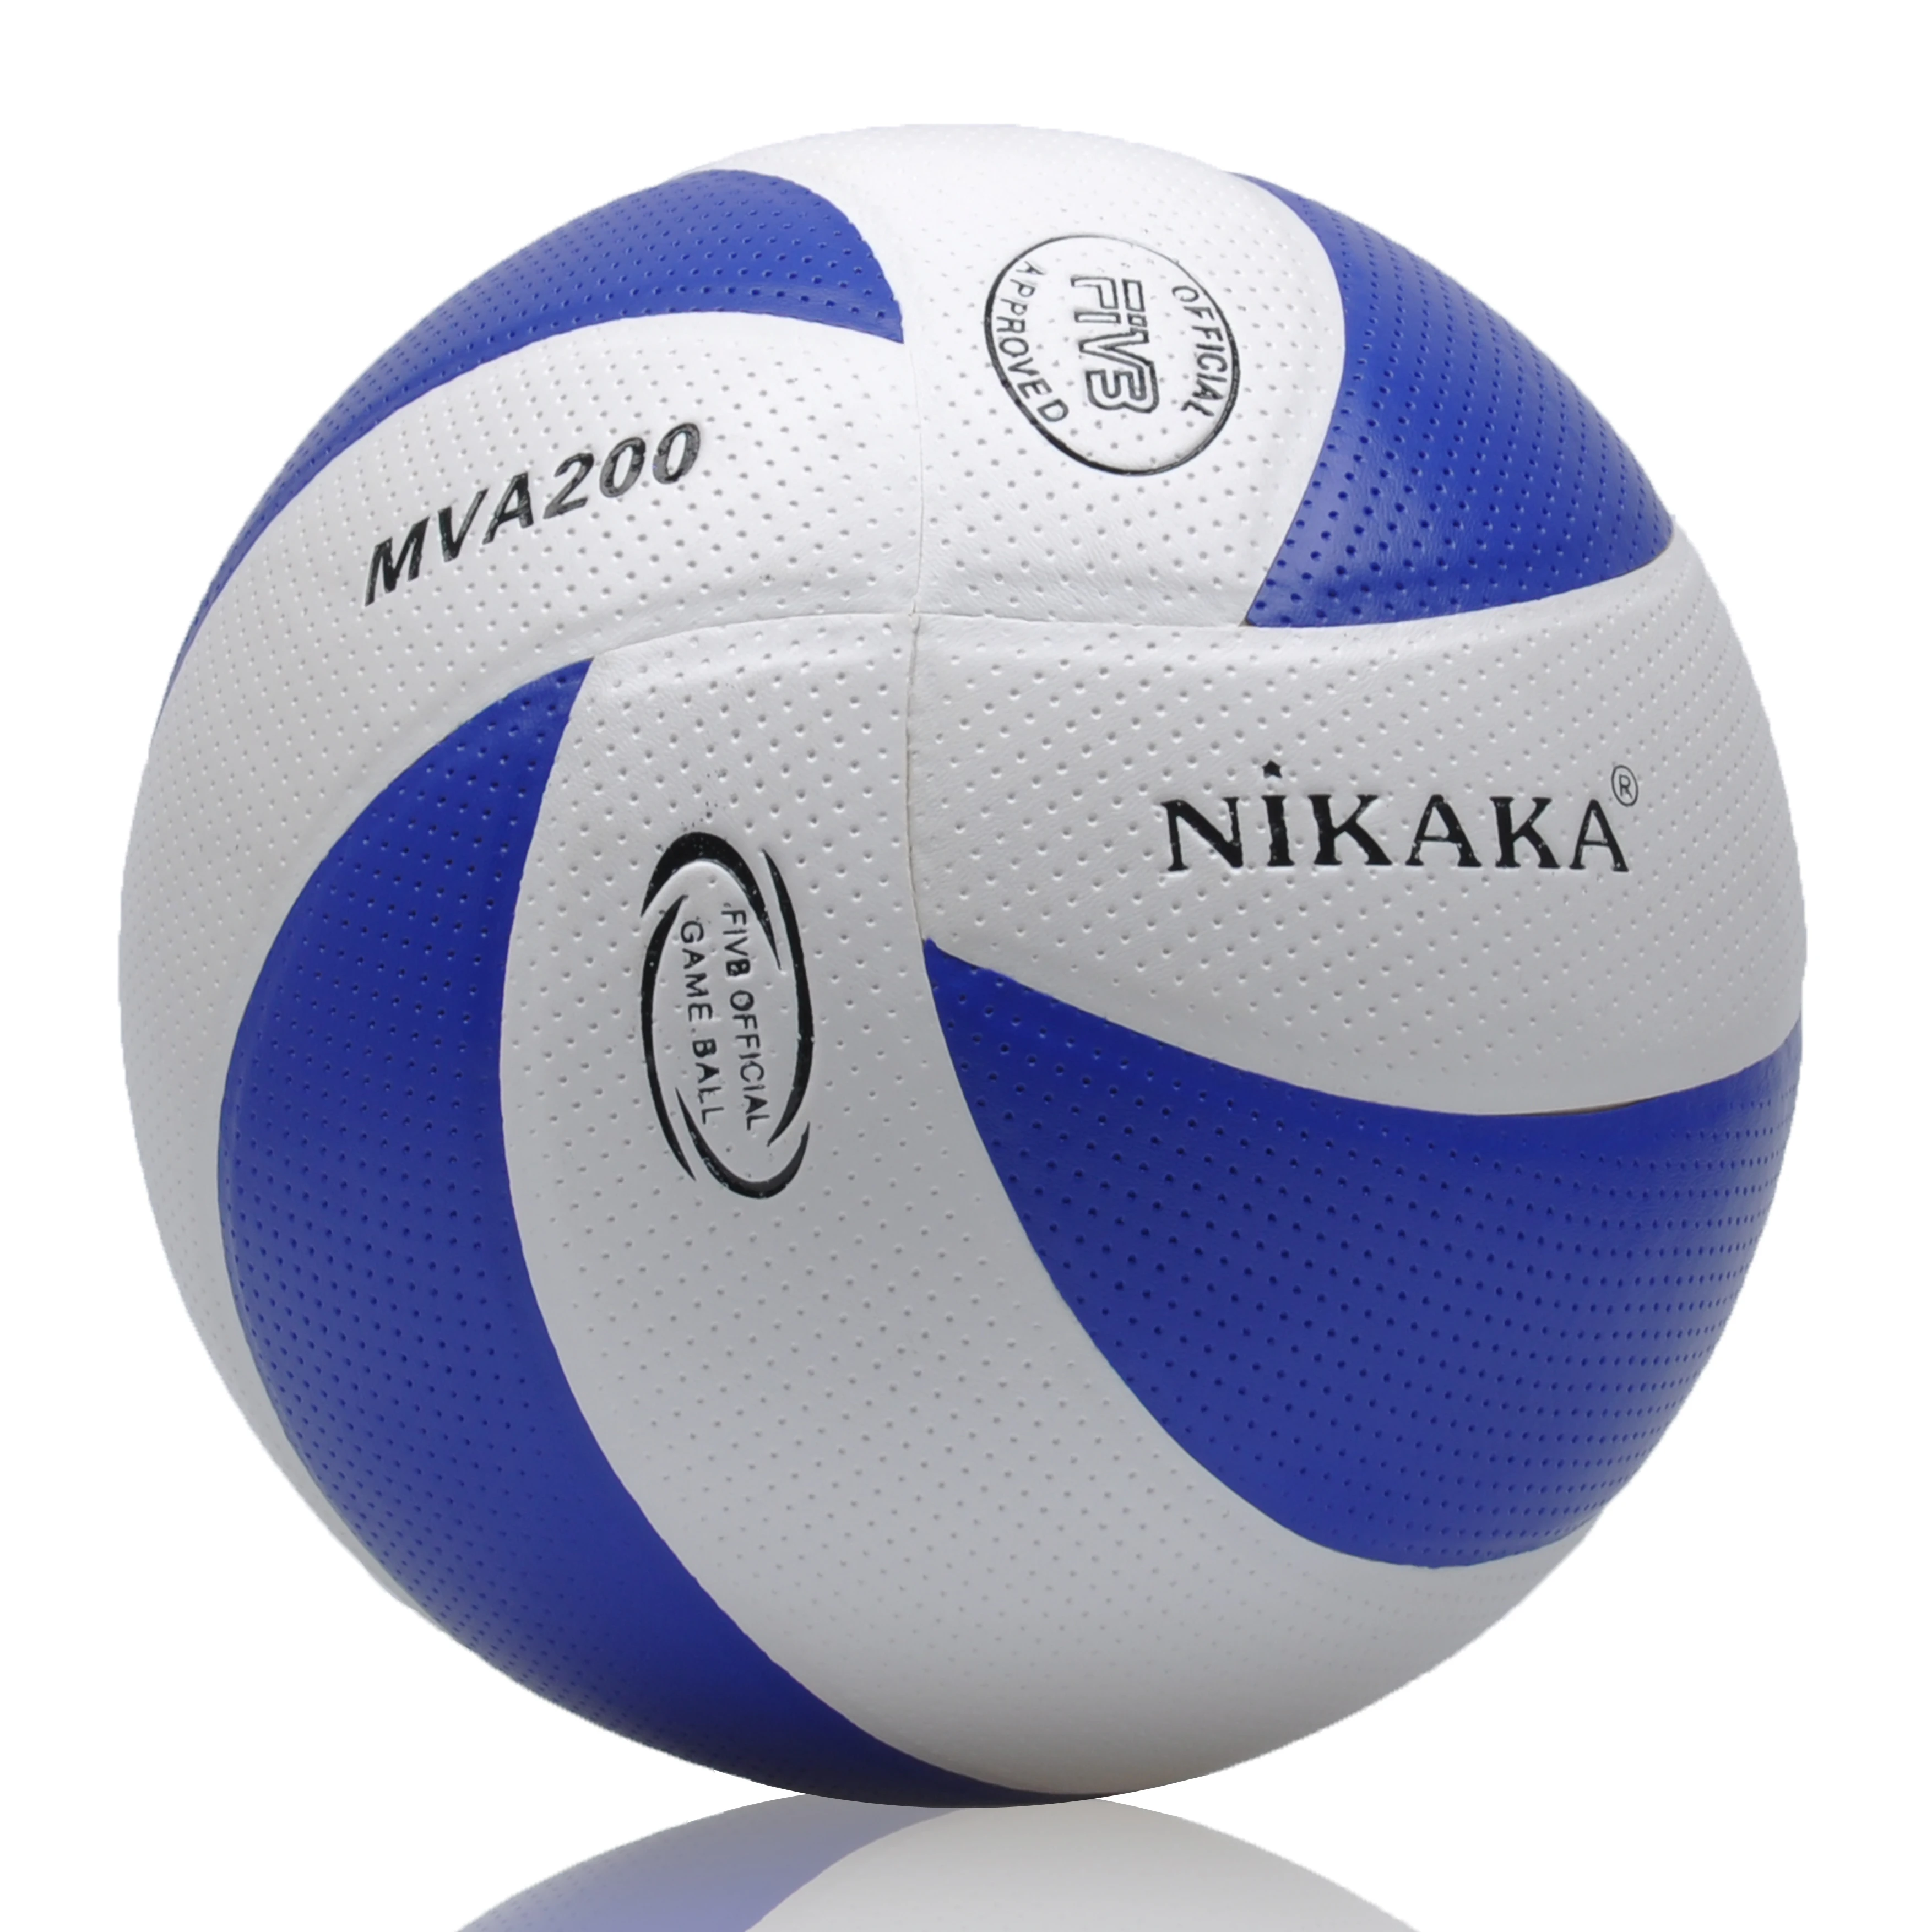 2018 New Pvc Volleyball With Good Quality - Buy Traning Ball,Colorful ...